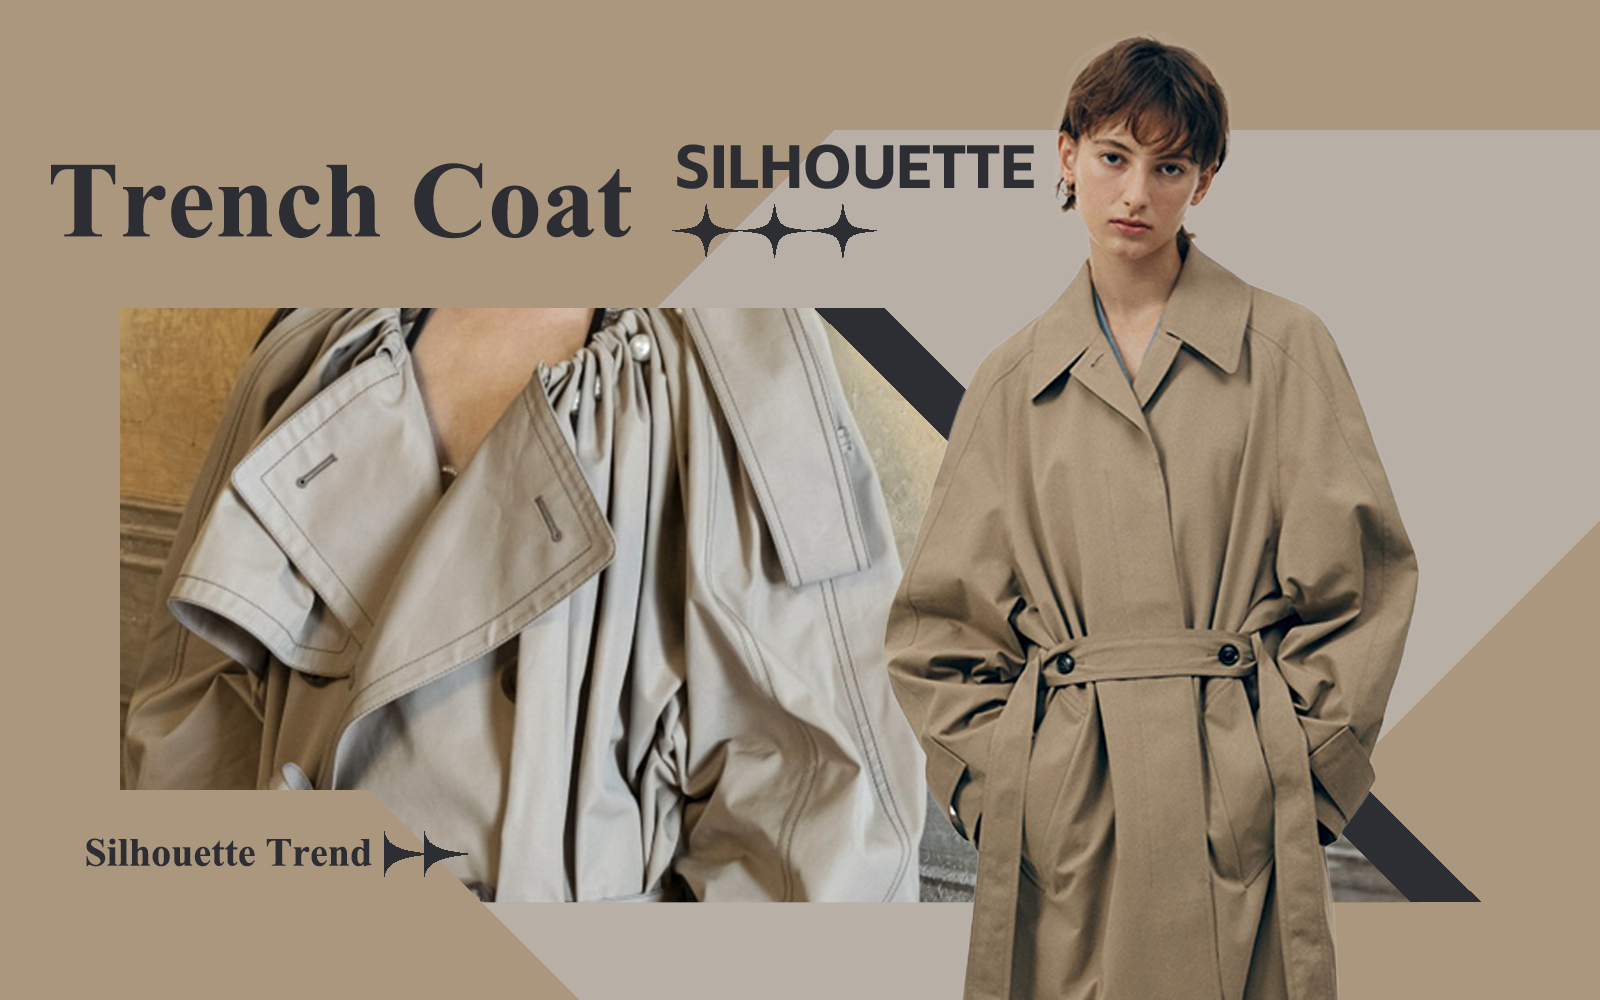 Minimalist Unisex -- The Silhouette Trend for Women's Trench Coat